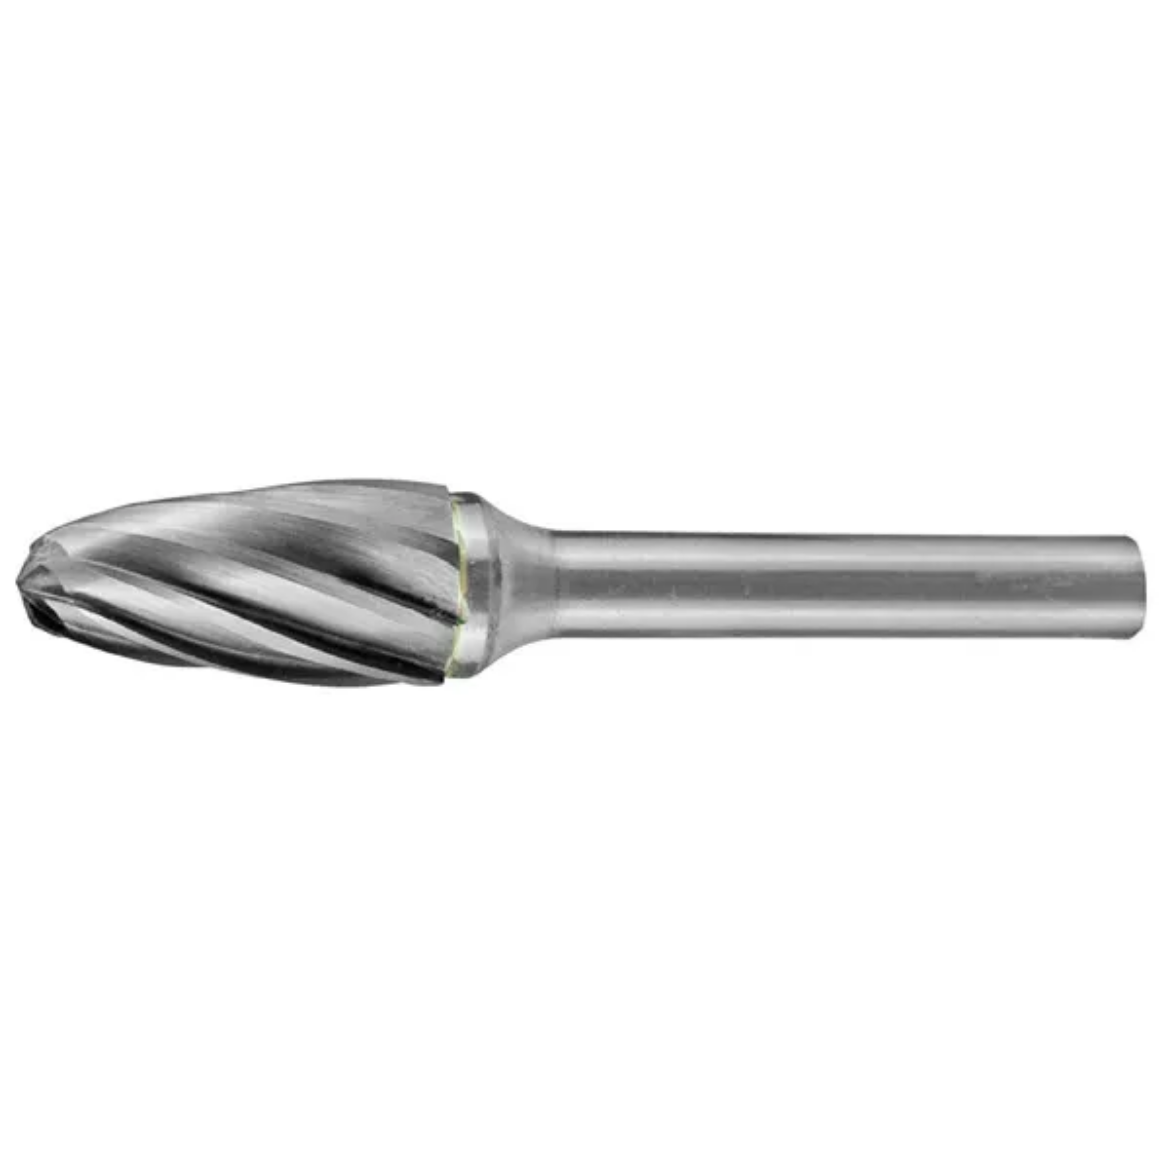 Picture of HOLEMAKER CARBIDE BURR, TREE SHAPE RADIUS END, 3/8" X 3/4" HEAD, 1/4" SHANK AC